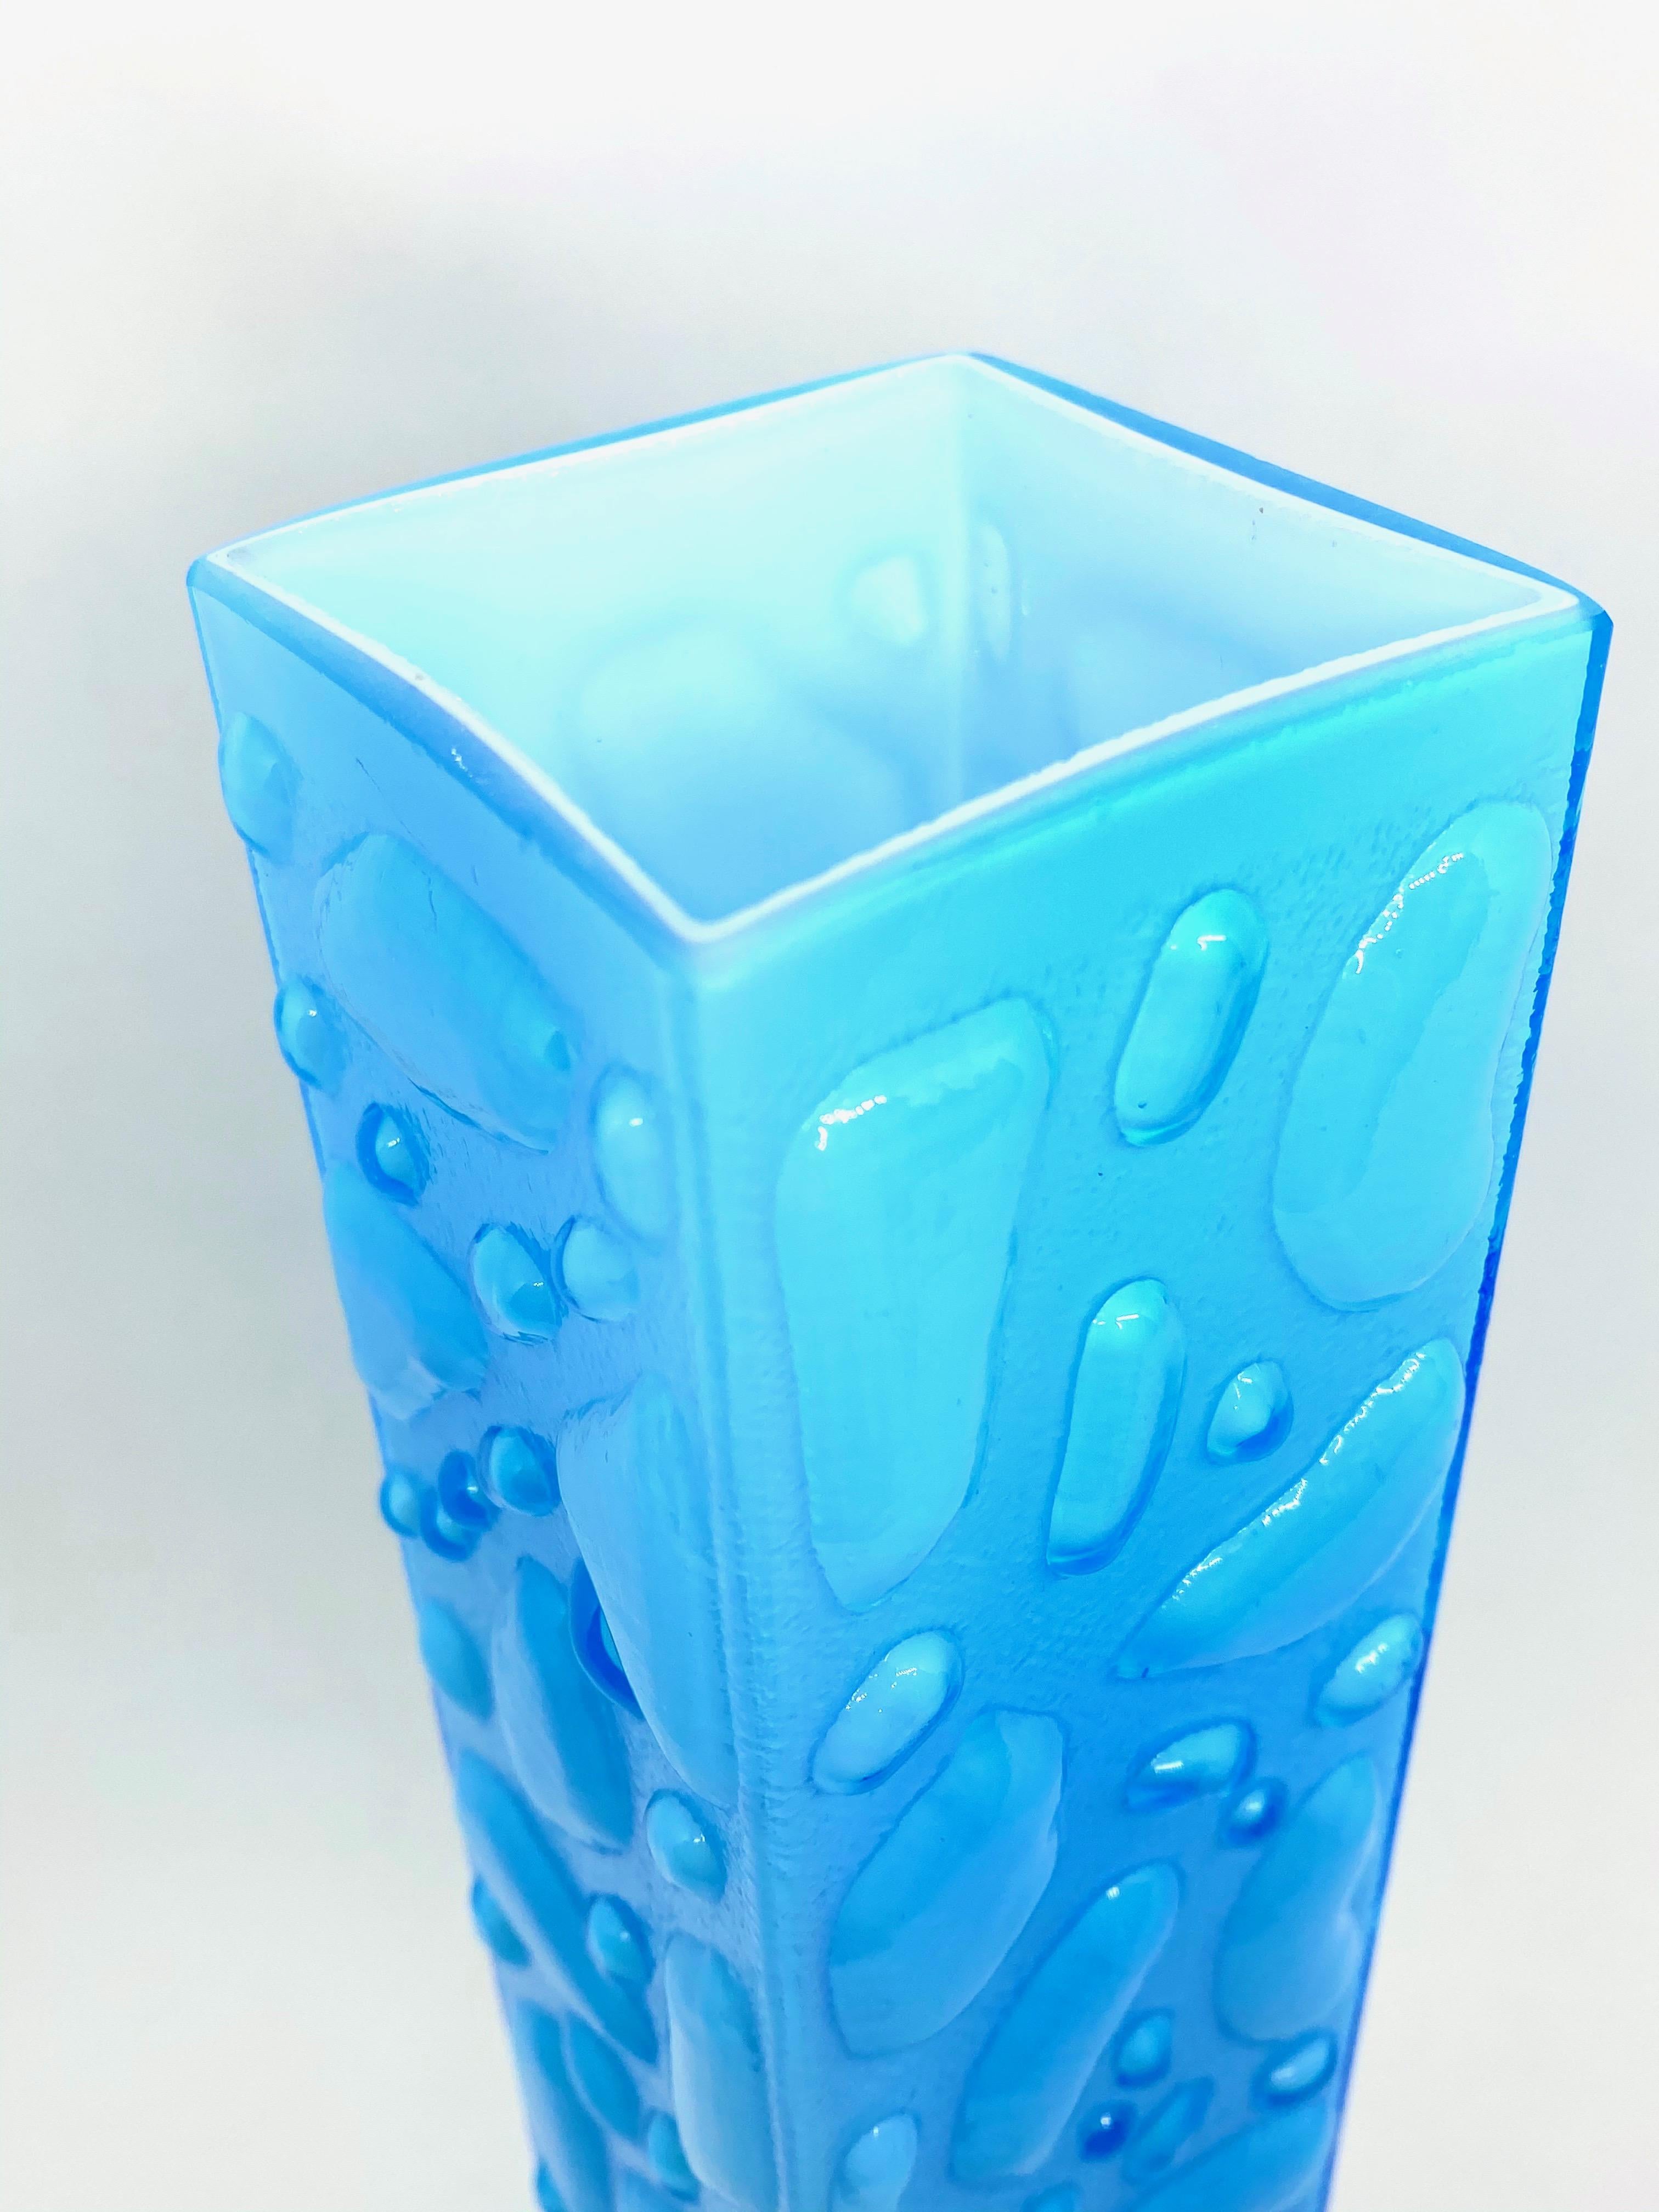 Late 20th Century Large Bubbled Glass Vase by Gral Glas in Turquoise, circa 1970s